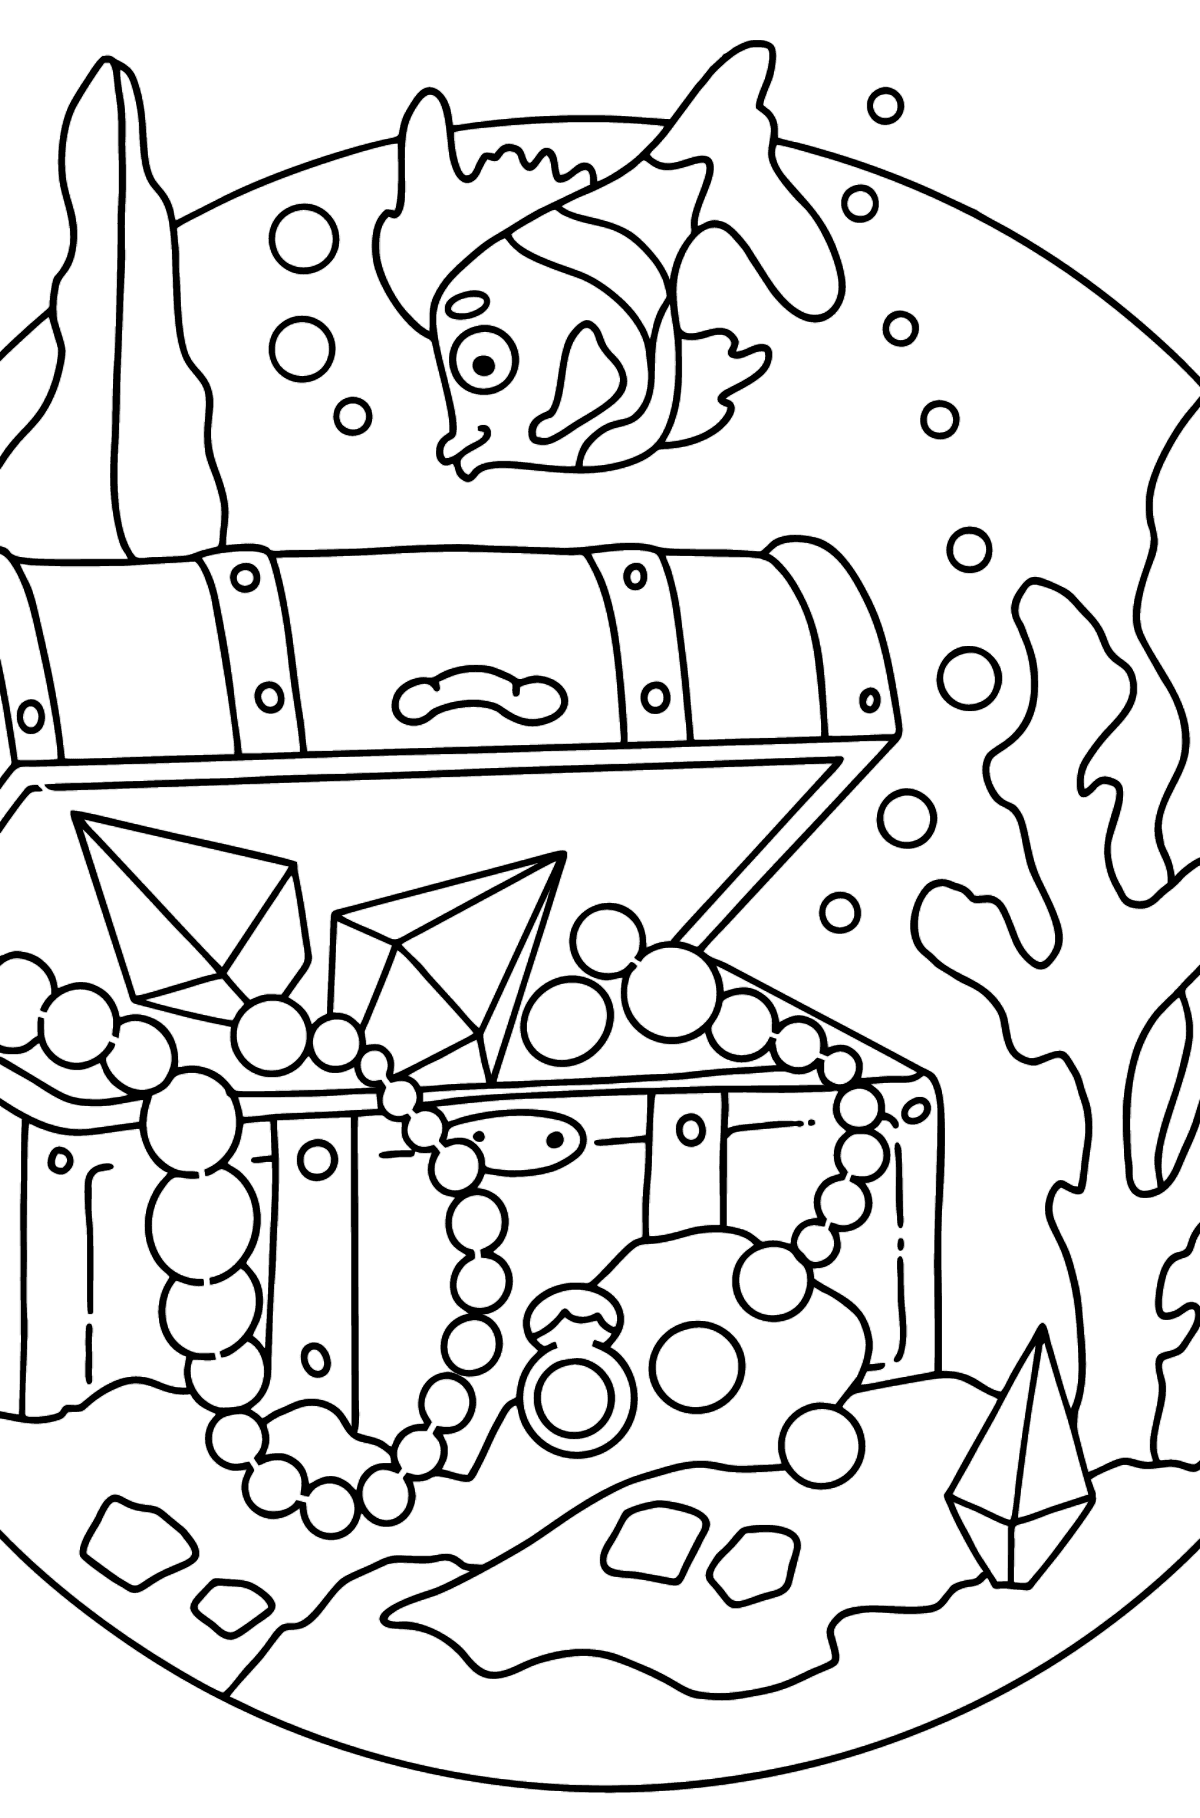 Coloring Page - A Fish is Taking a Peek at a Treasure - Coloring Pages for Kids